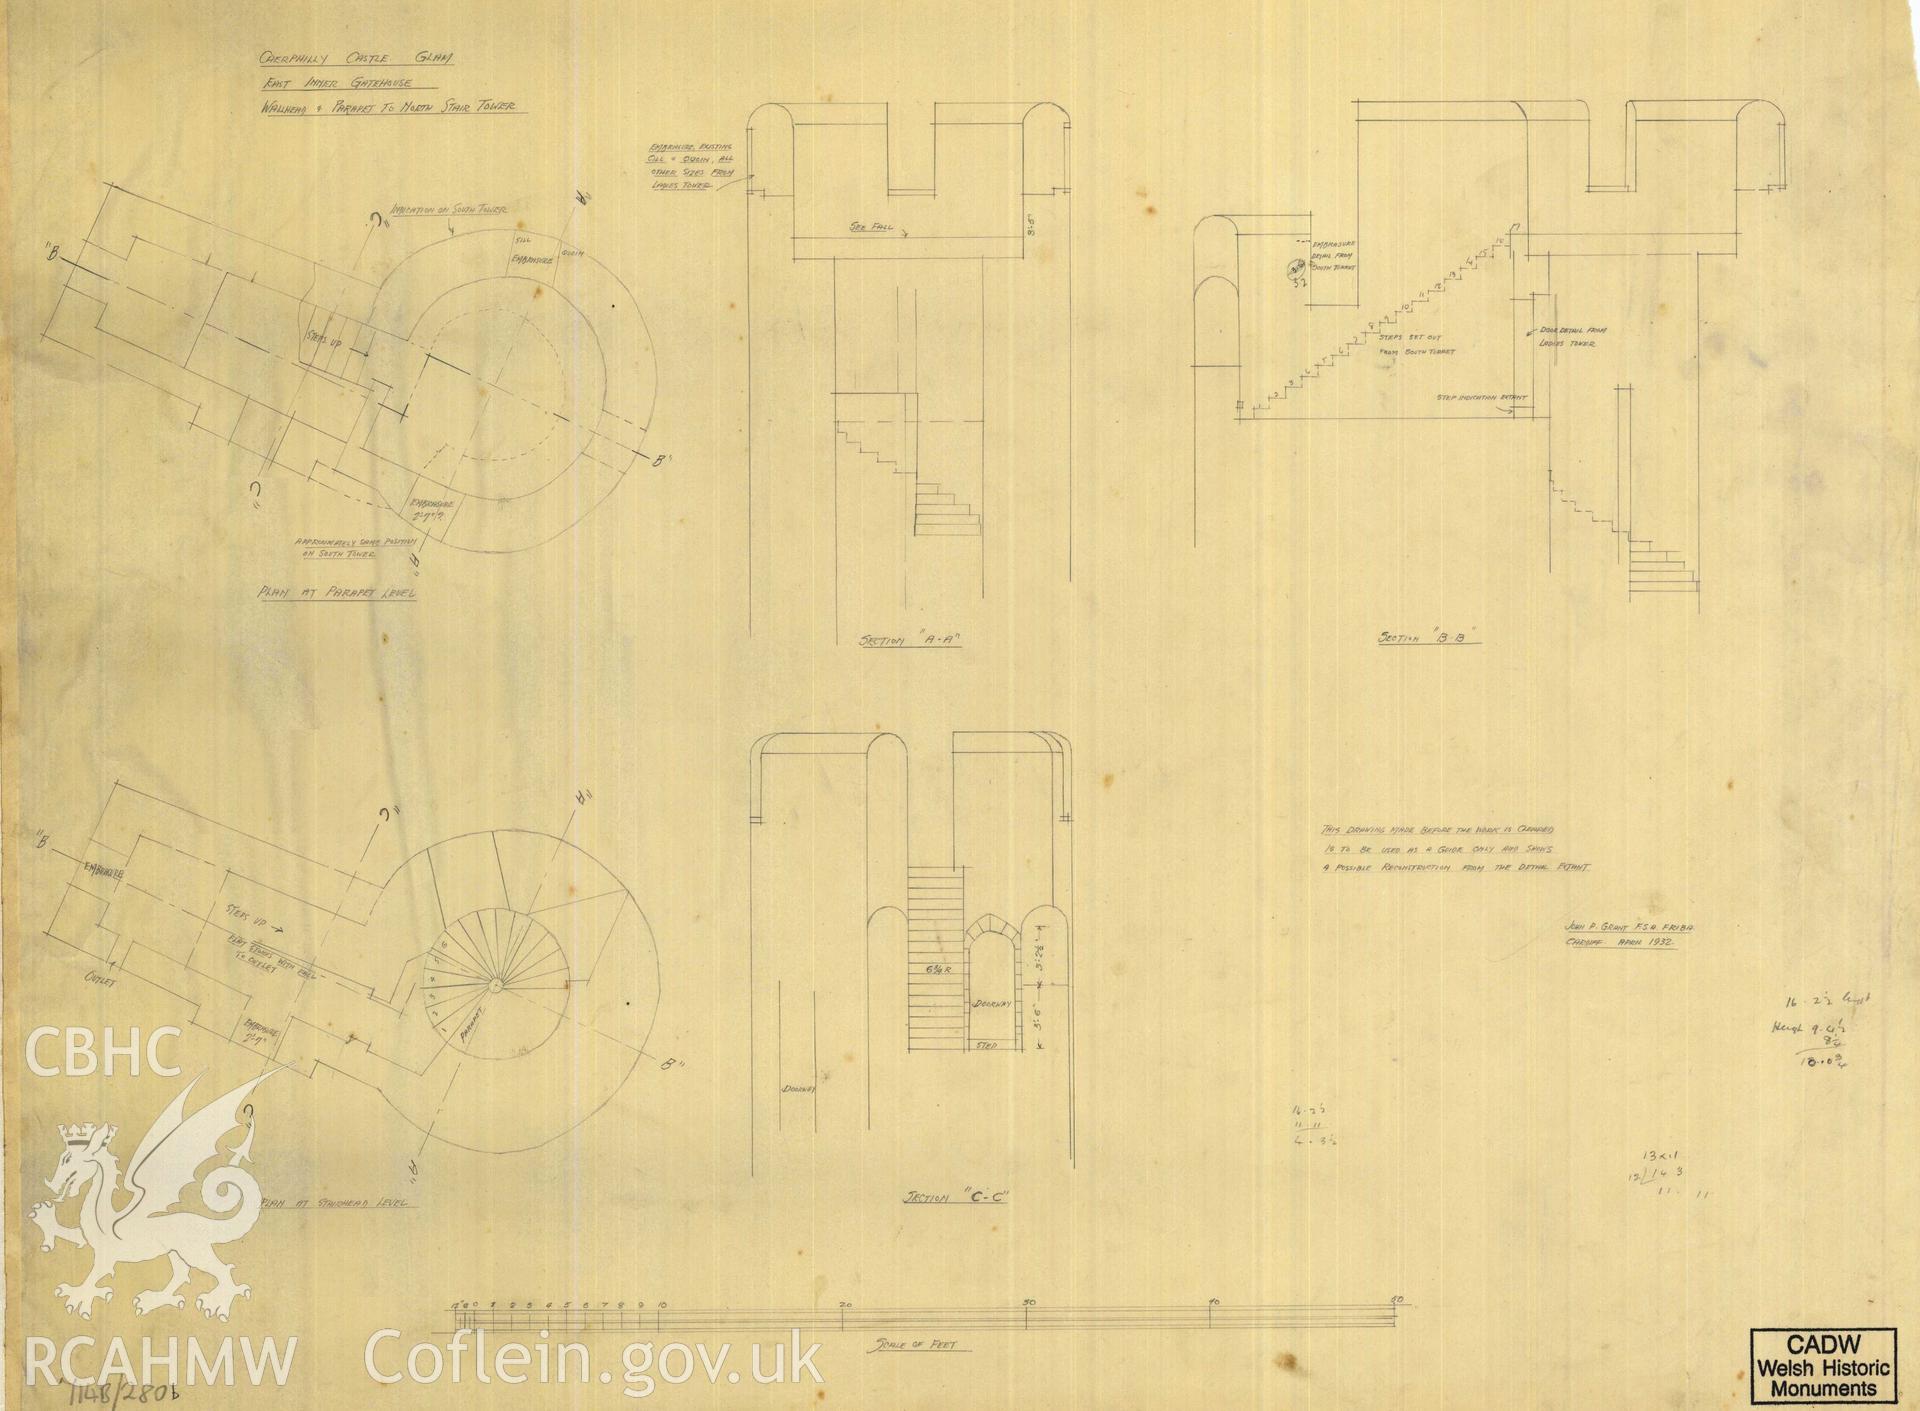 Cadw guardianship monument drawing of Caerphilly Castle. Inner E gate, S turret top. Cadw Ref. No:714B/280b. Scale 1:48.